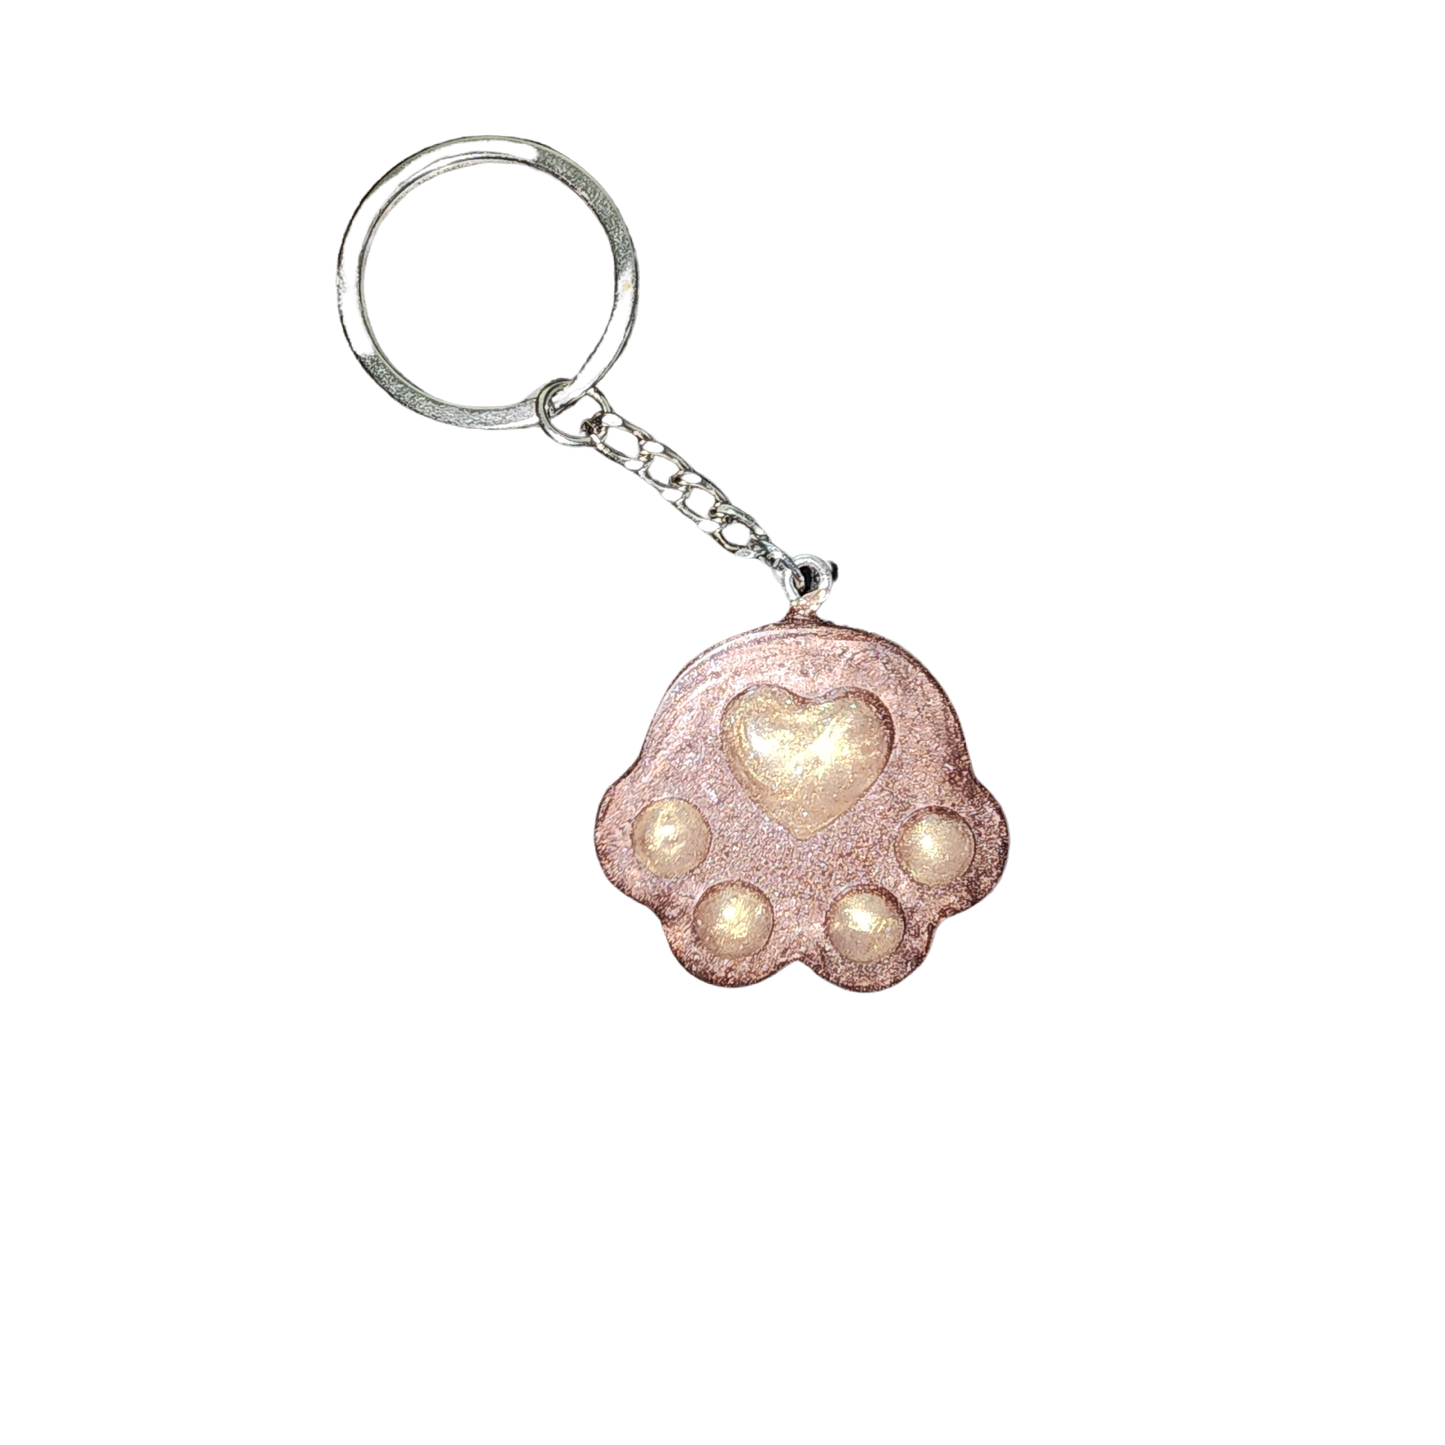 Memorial Keychain made with cremation ashes (large pawprint)